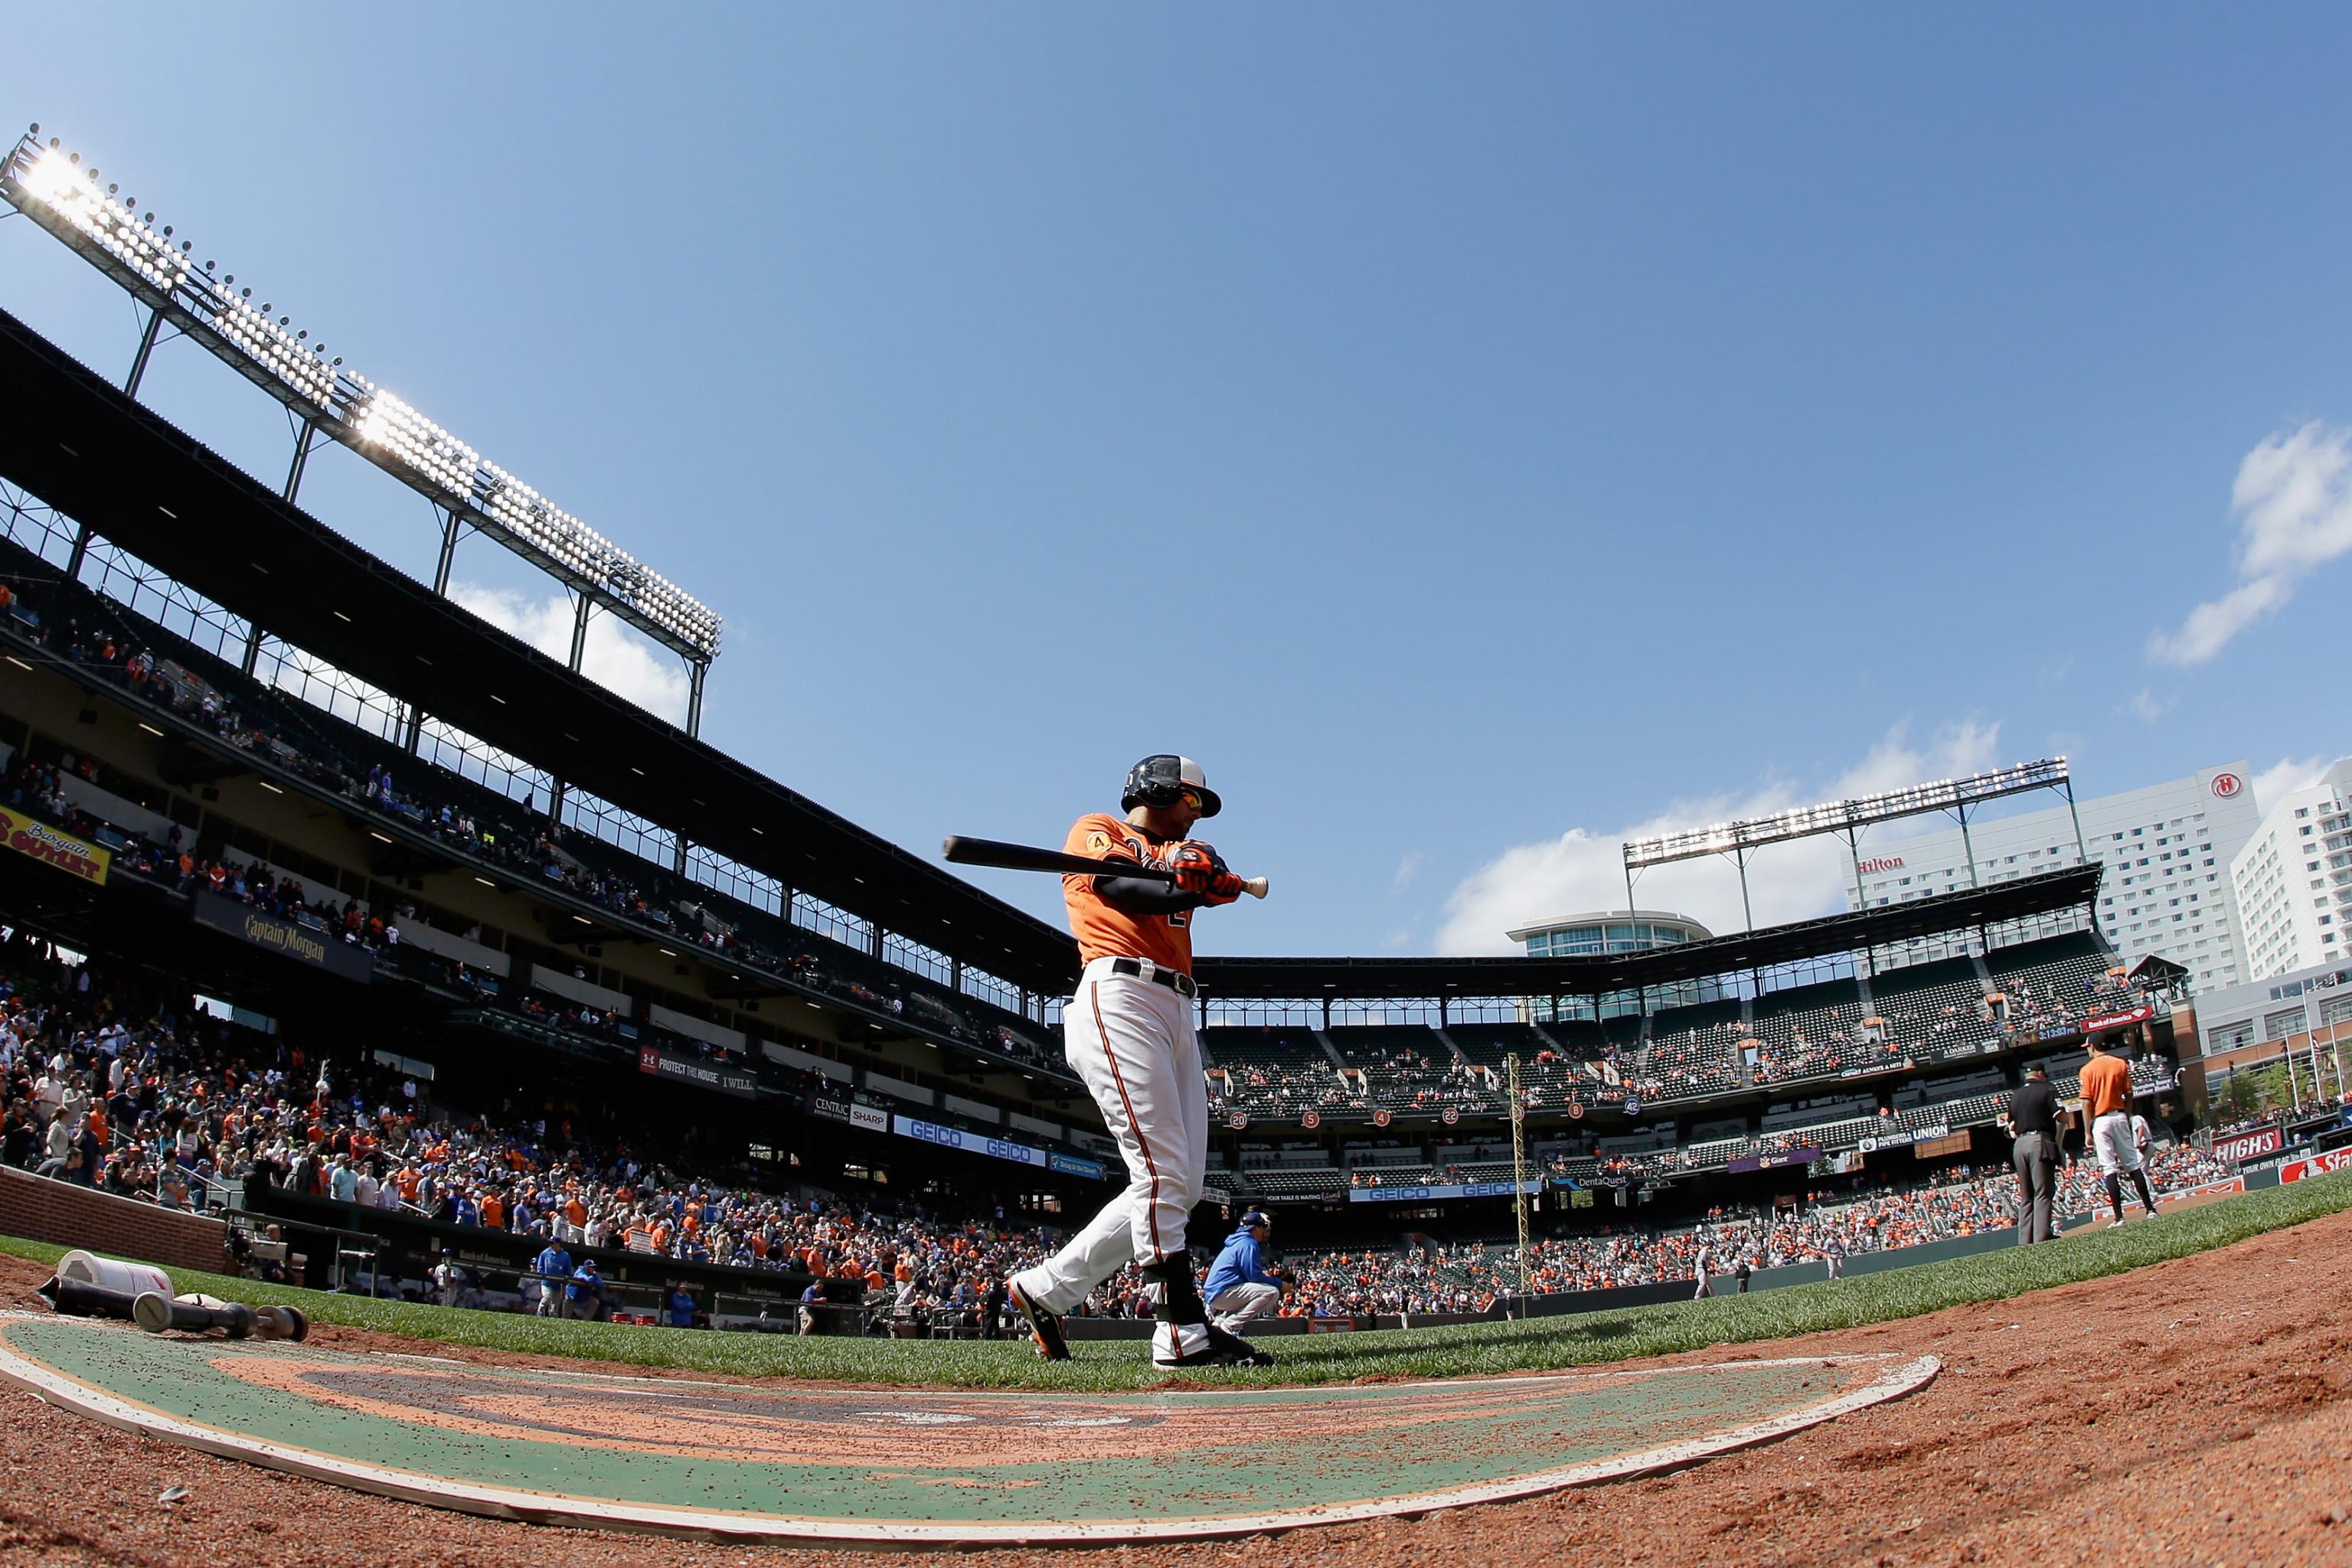 Markakis underappreciated, but not by Orioles